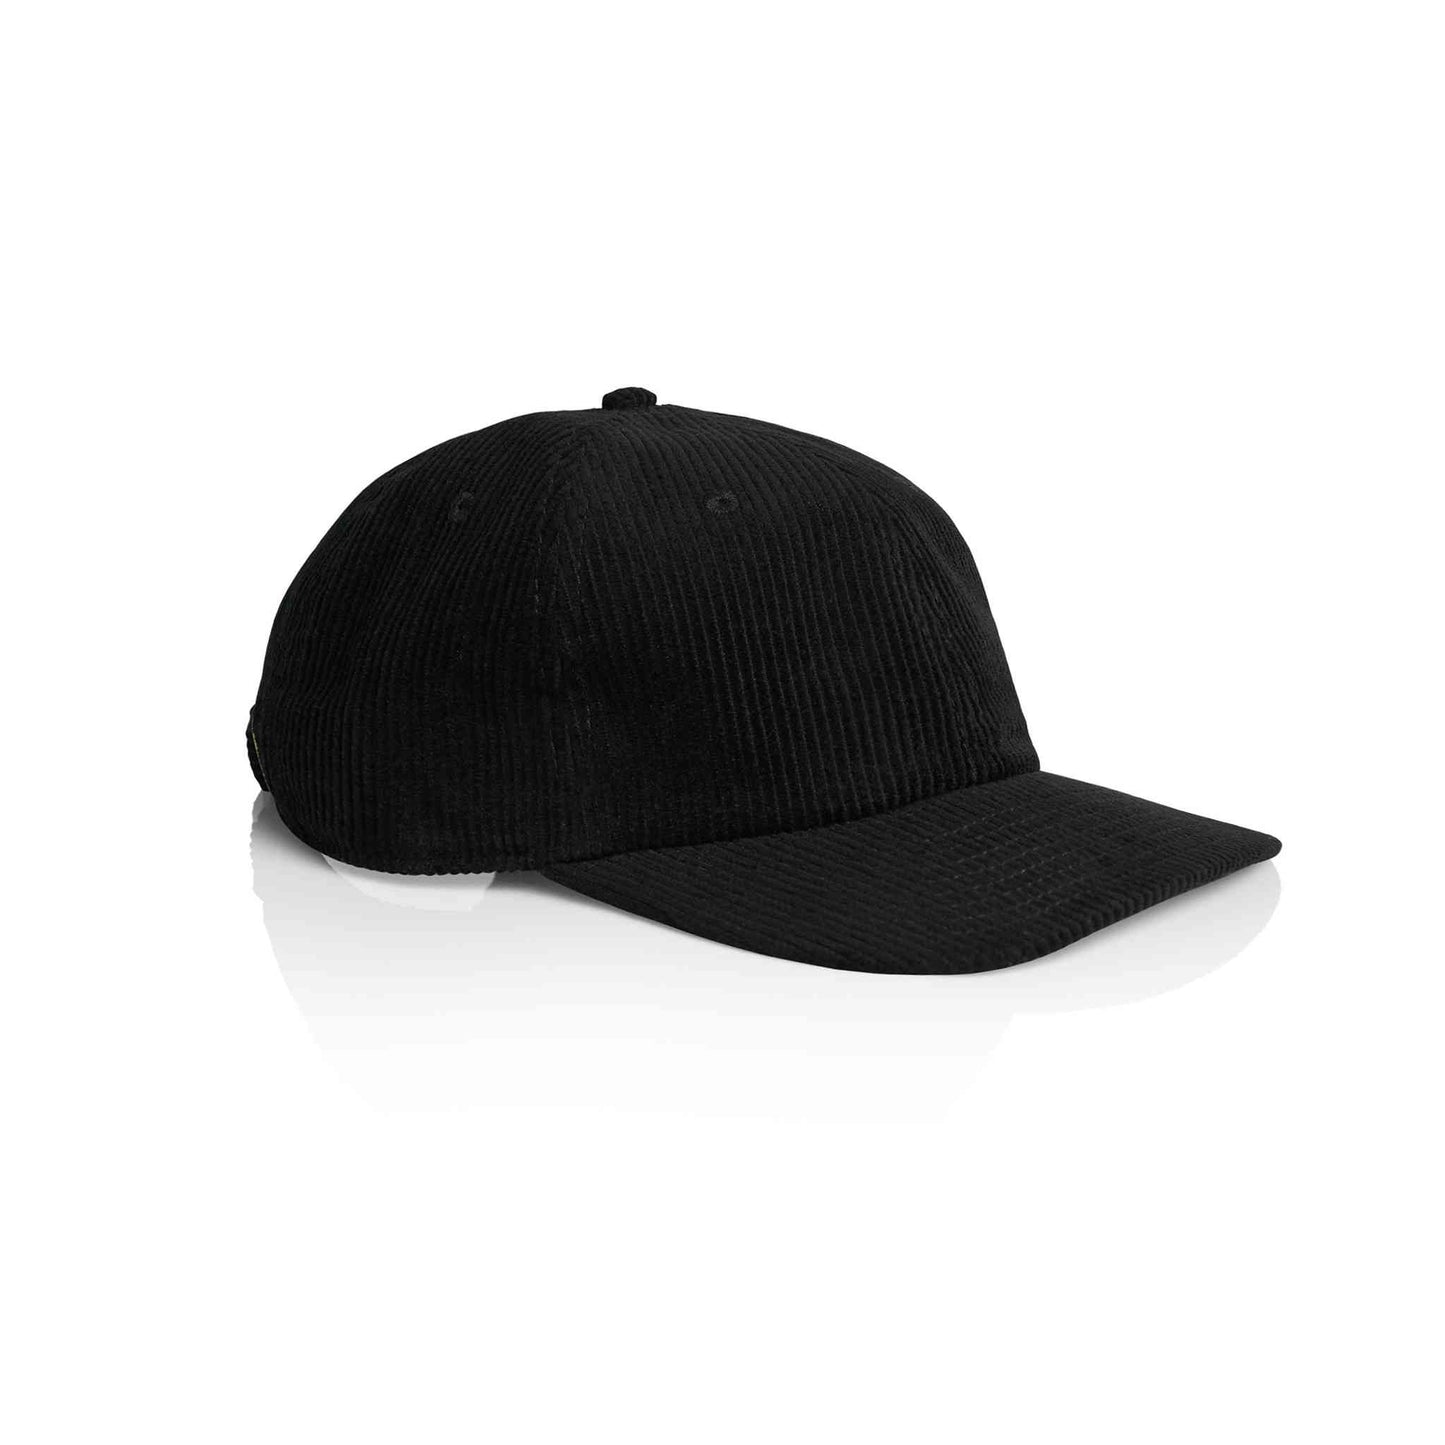 AS Colour 1152 Class 6 panel cord cap in black colour, side view